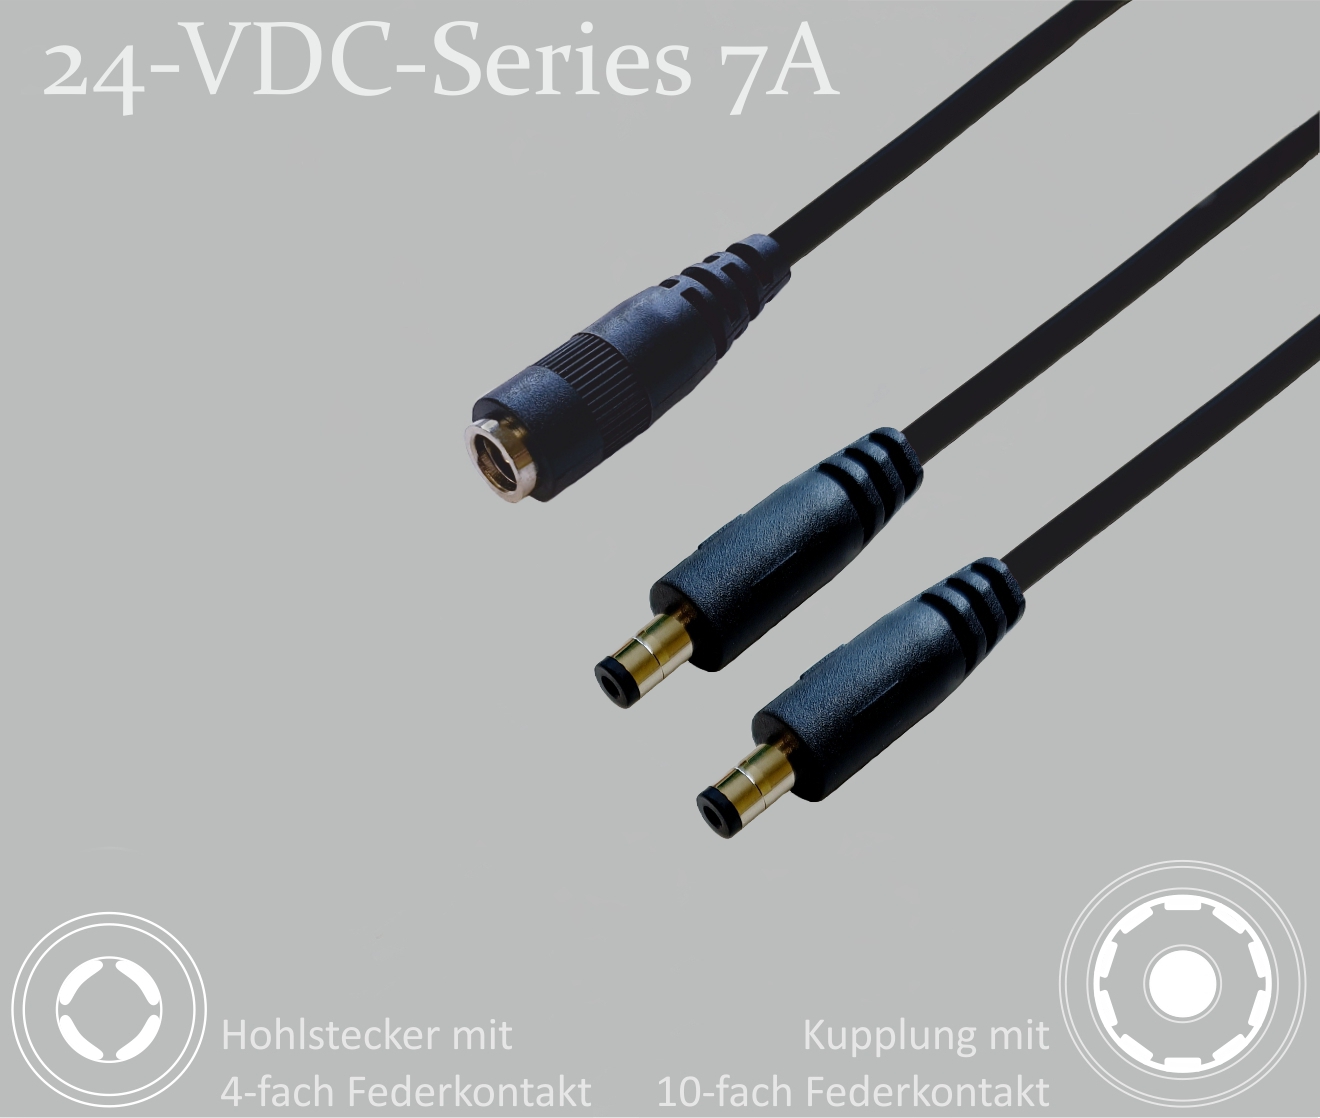 24-VDC-Series 7A, DC distributor 1x DC coupling with 10-spring contact to 2x DC plug with 4-spring contact, 2.5x5.5mm, round cable 2x0.5mm², black, 0.3m